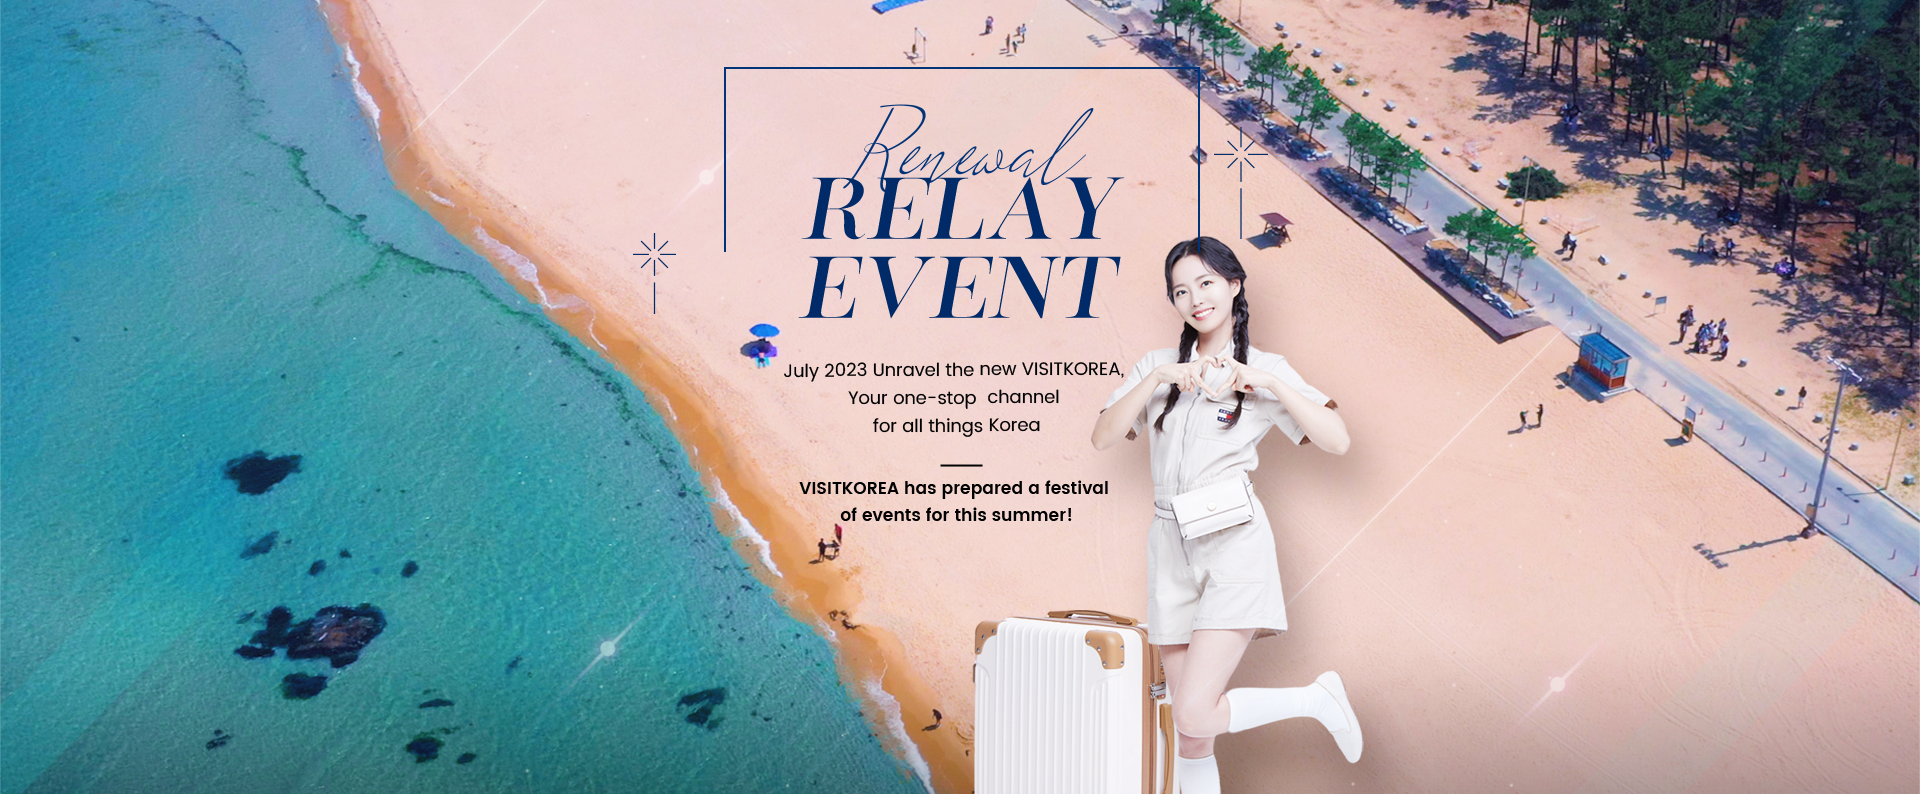 Renewal Relay Event July 2023 Unravel the new VISITKOREA, Your one-stop  channel for all things Korea VISITKOREA has prepared a festival of events for this summer!